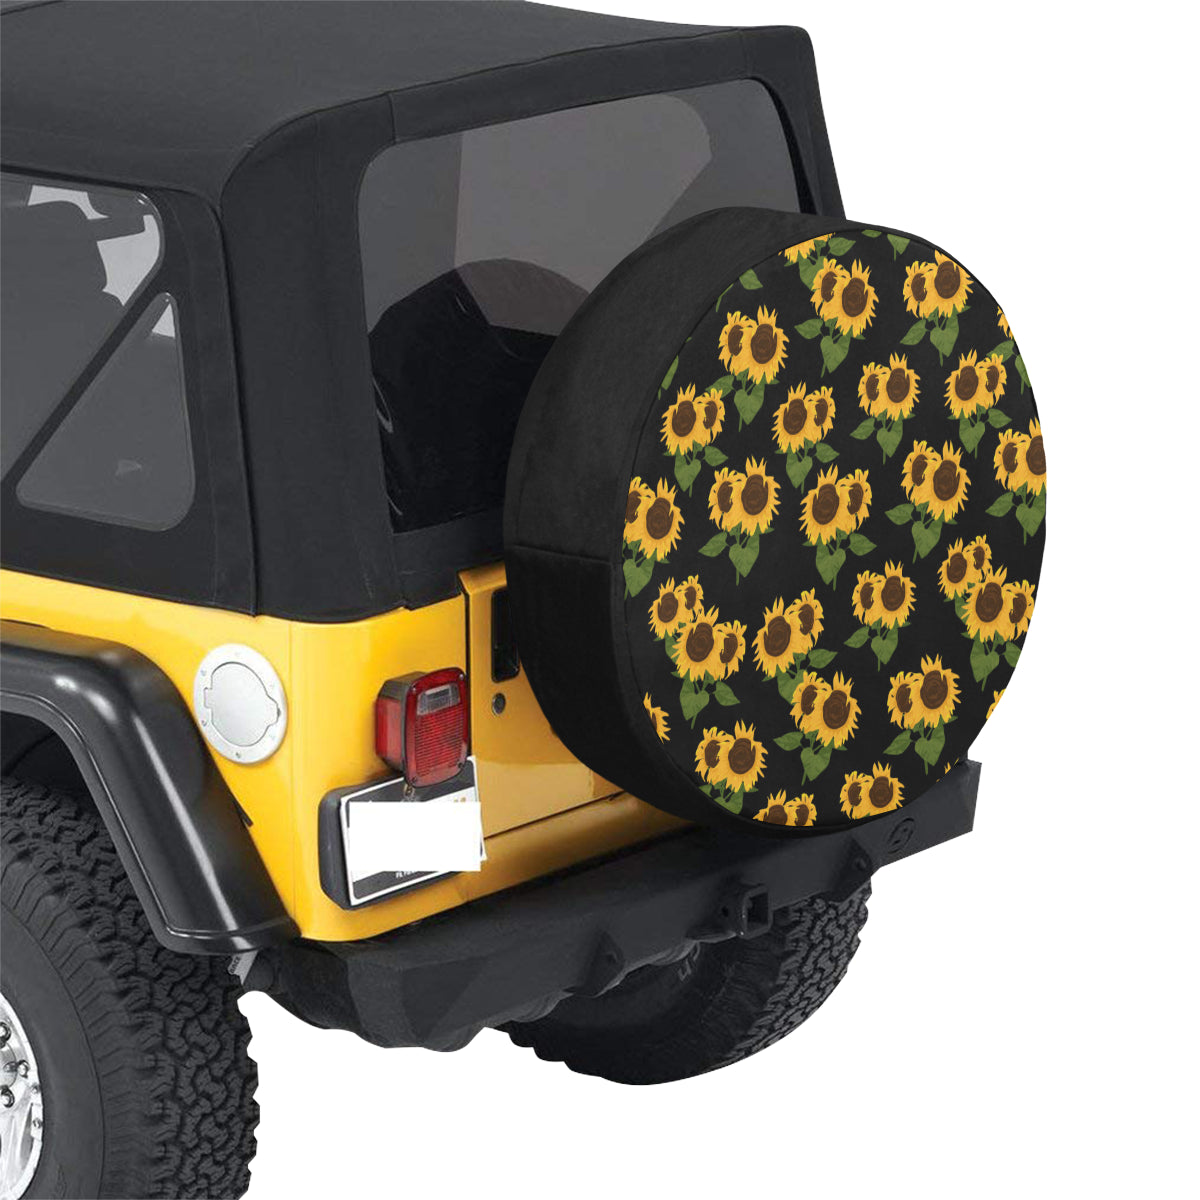 Sunflower Spare Tire Cover, Spare Wheel Cover, Floral Yellow Flowers Black Custom Unique Design, Back Tire Adventurous Car Lover Gift Starcove Fashion